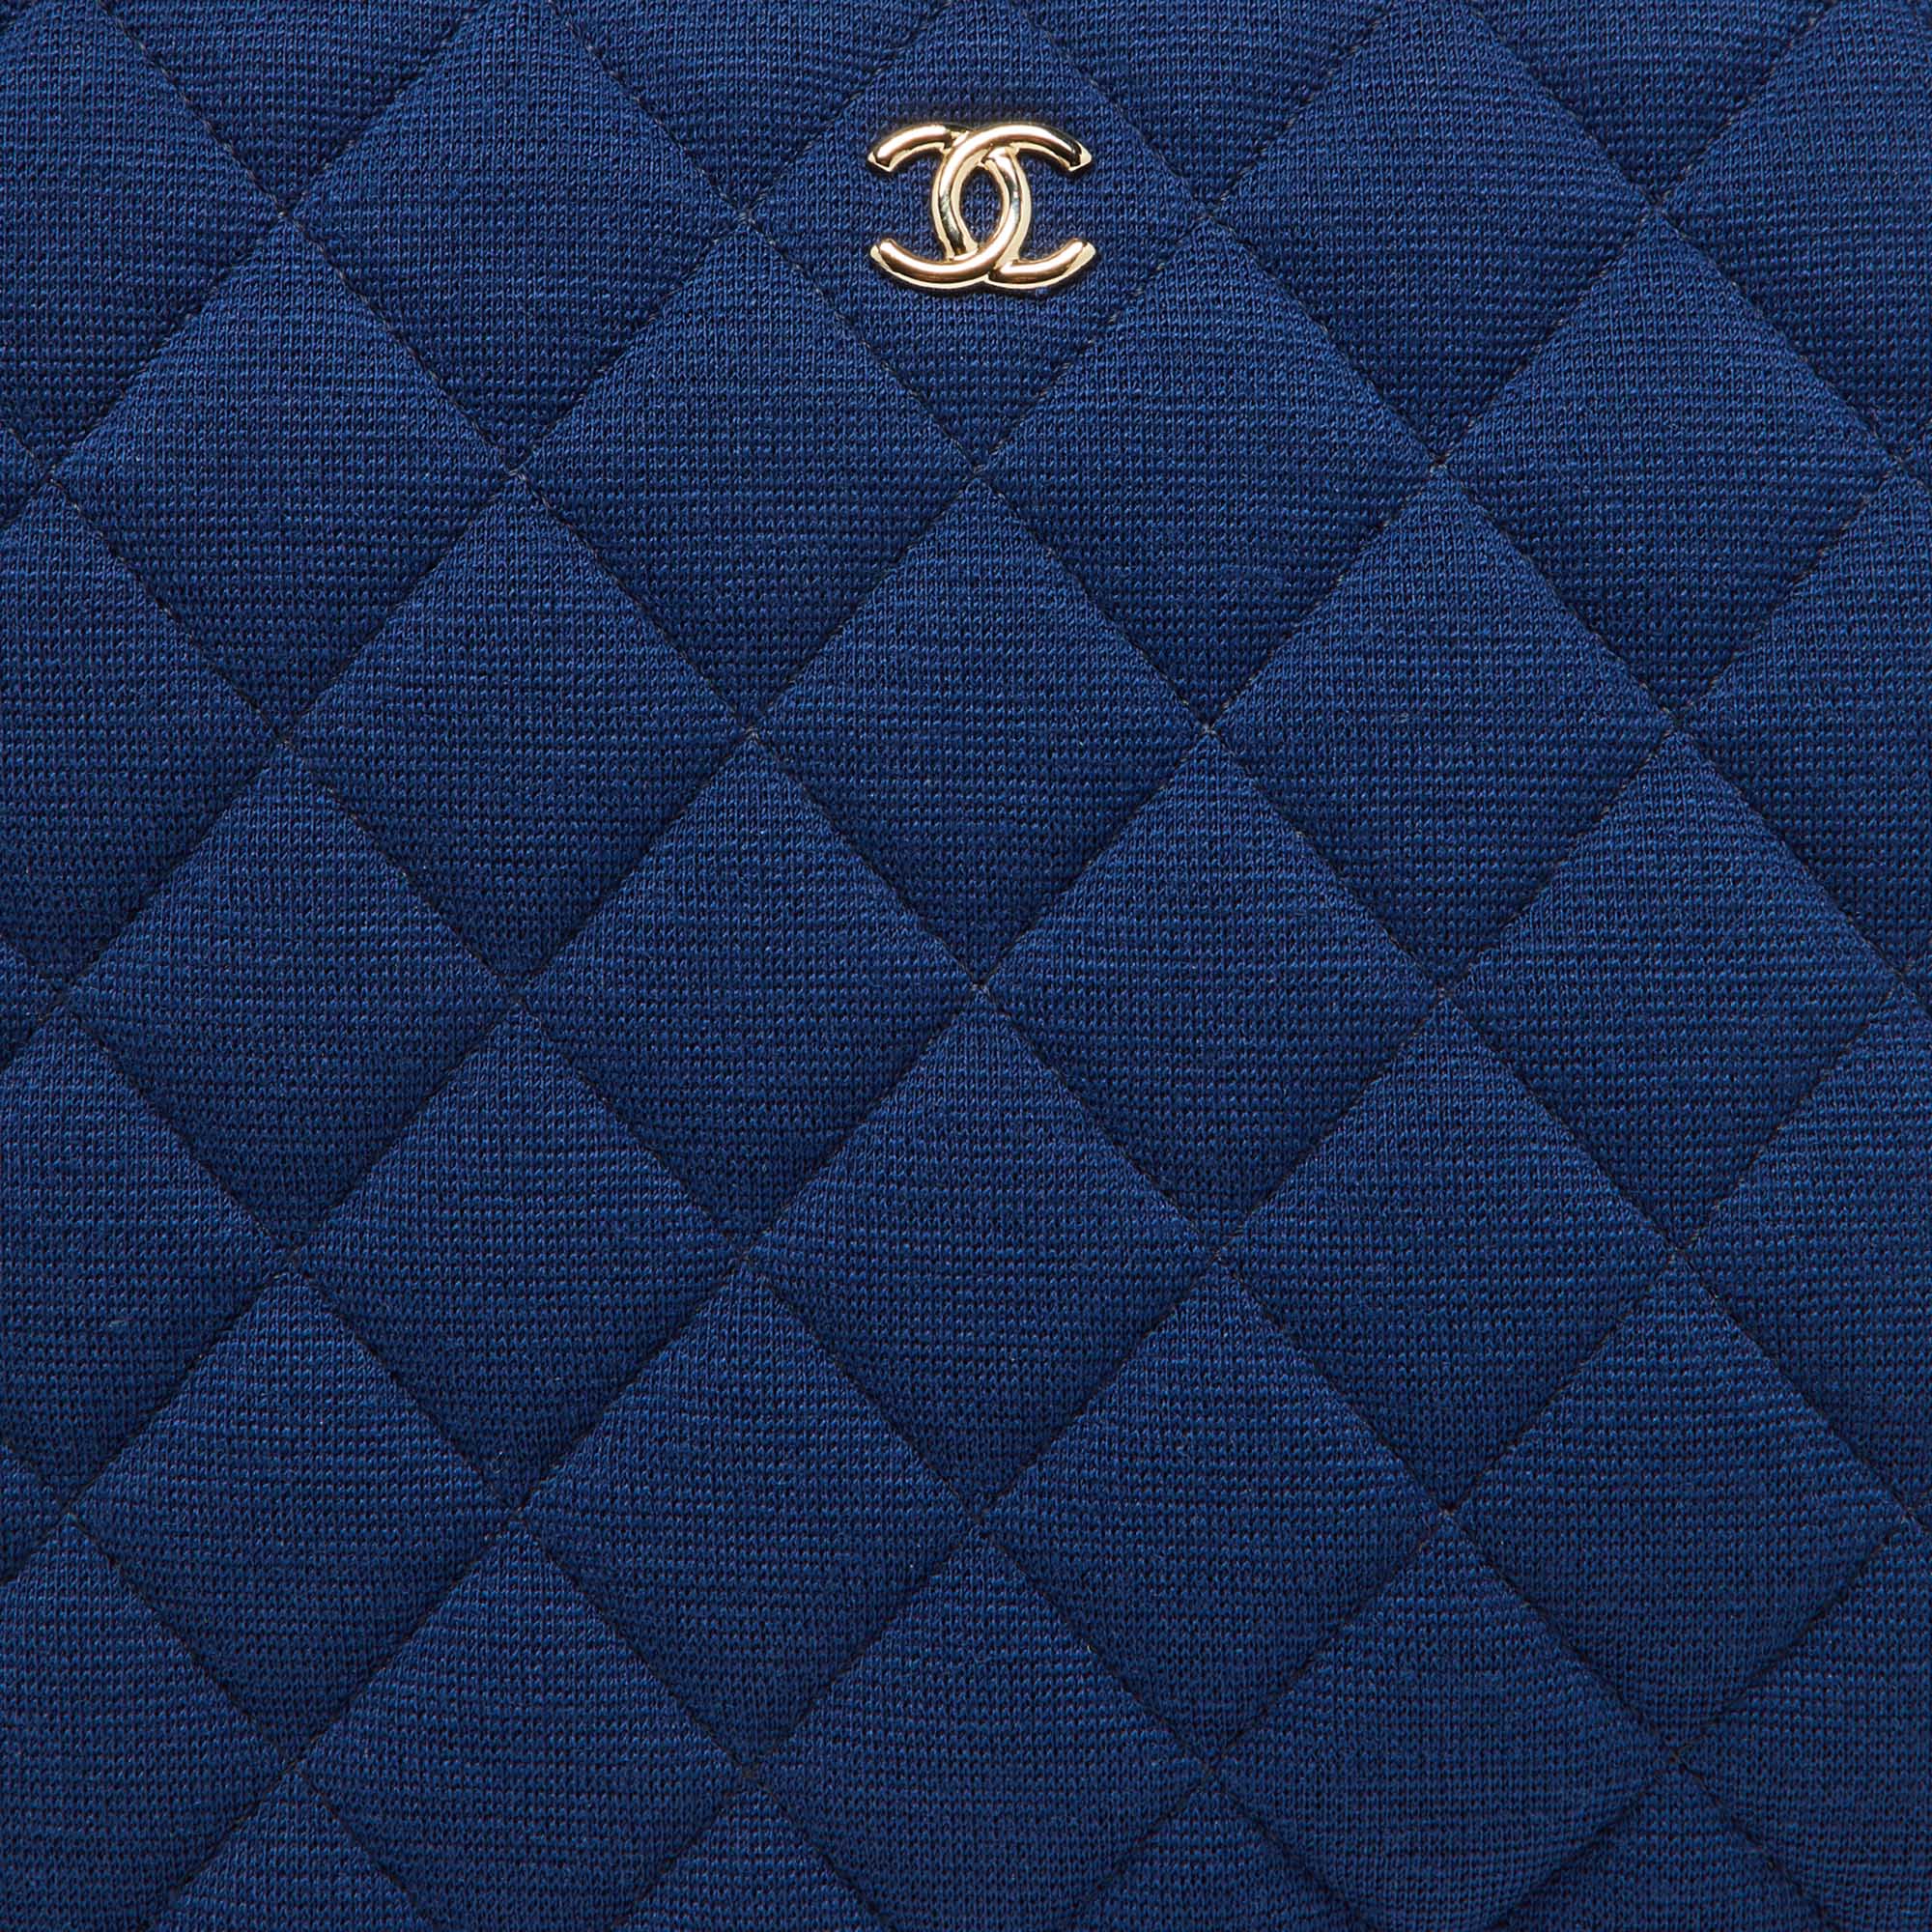 Chanel Blue Quilted Jersey Medium O Case Clutch